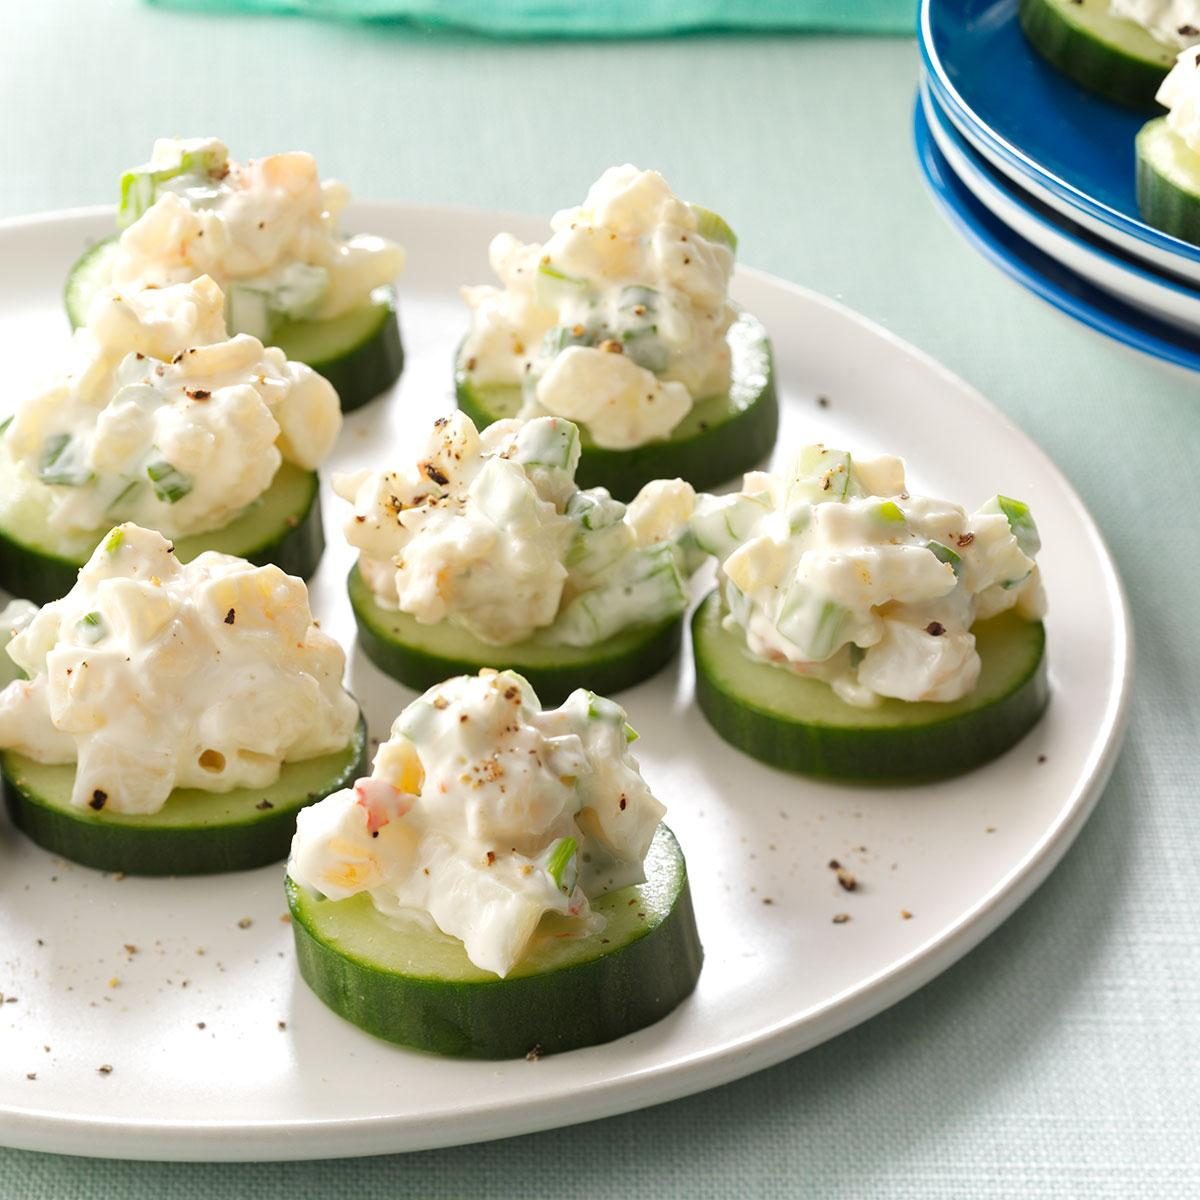 <p>I always make these appetizers for our get-togethers. They're easy to prepare and a snappy addition to any party. —Kelly Alaniz, Eureka, California</p> <div class="listicle-page__buttons"> <div class="listicle-page__cta-button"><a href='https://www.tasteofhome.com/recipes/shrimp-cucumber-rounds/'>Go to Recipe</a></div> </div>